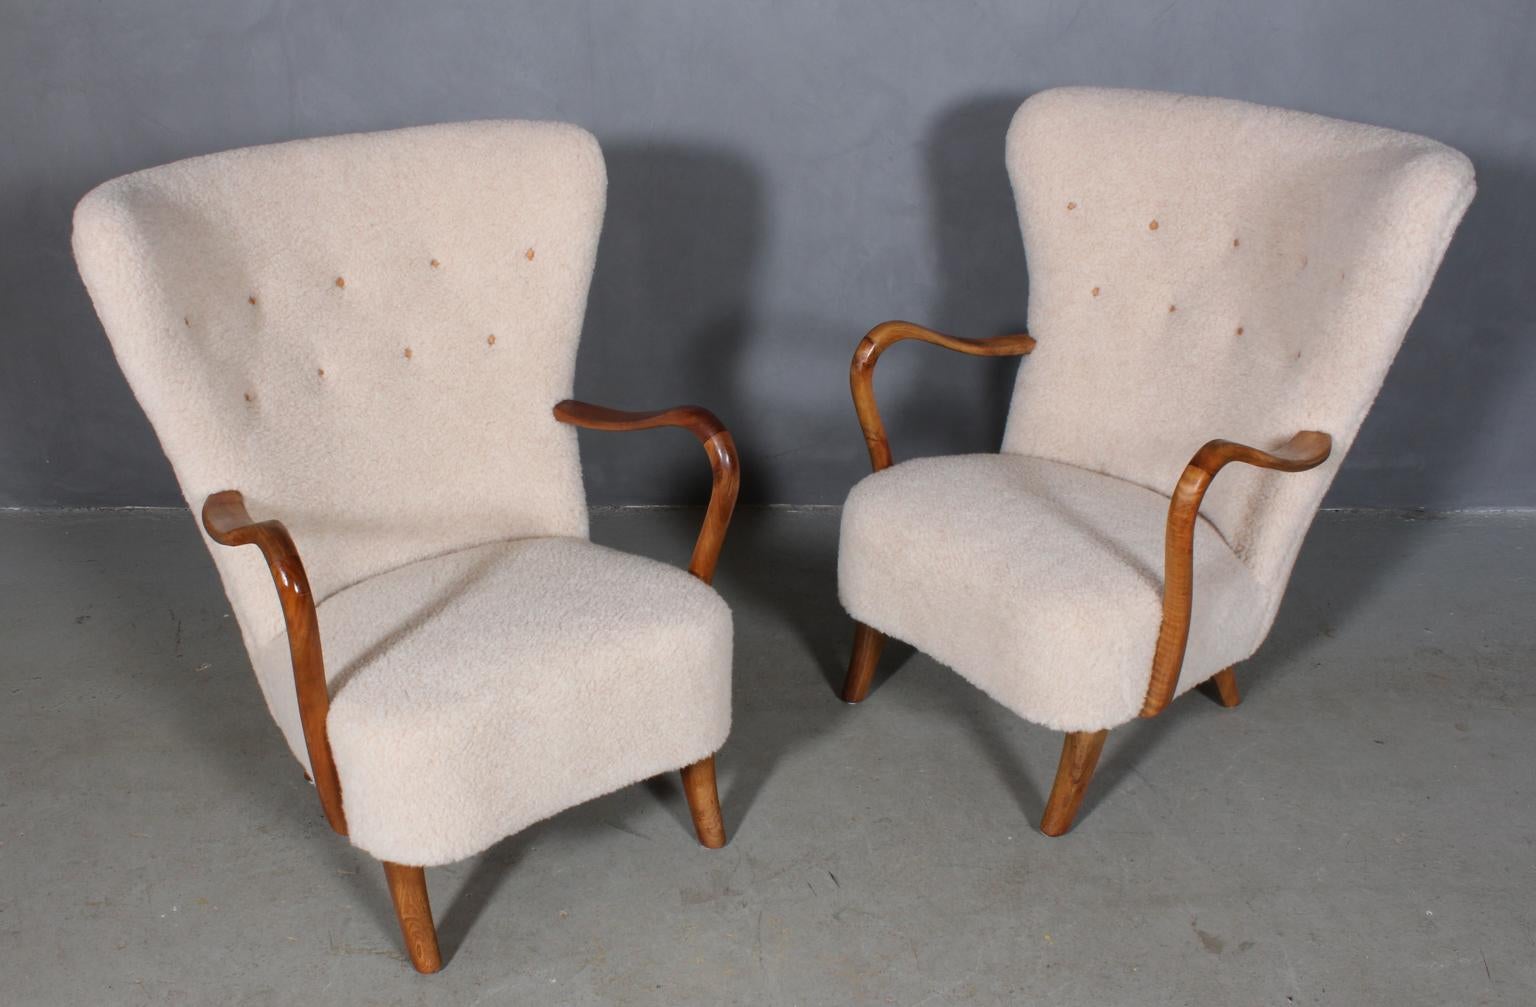 Alfred Christensen set of lounge chairs new upholstered with lamb wool and buttons of leather.

Legs and armrests of nut wood.

Made in the 1940s by Slagelse Møbelværk.

